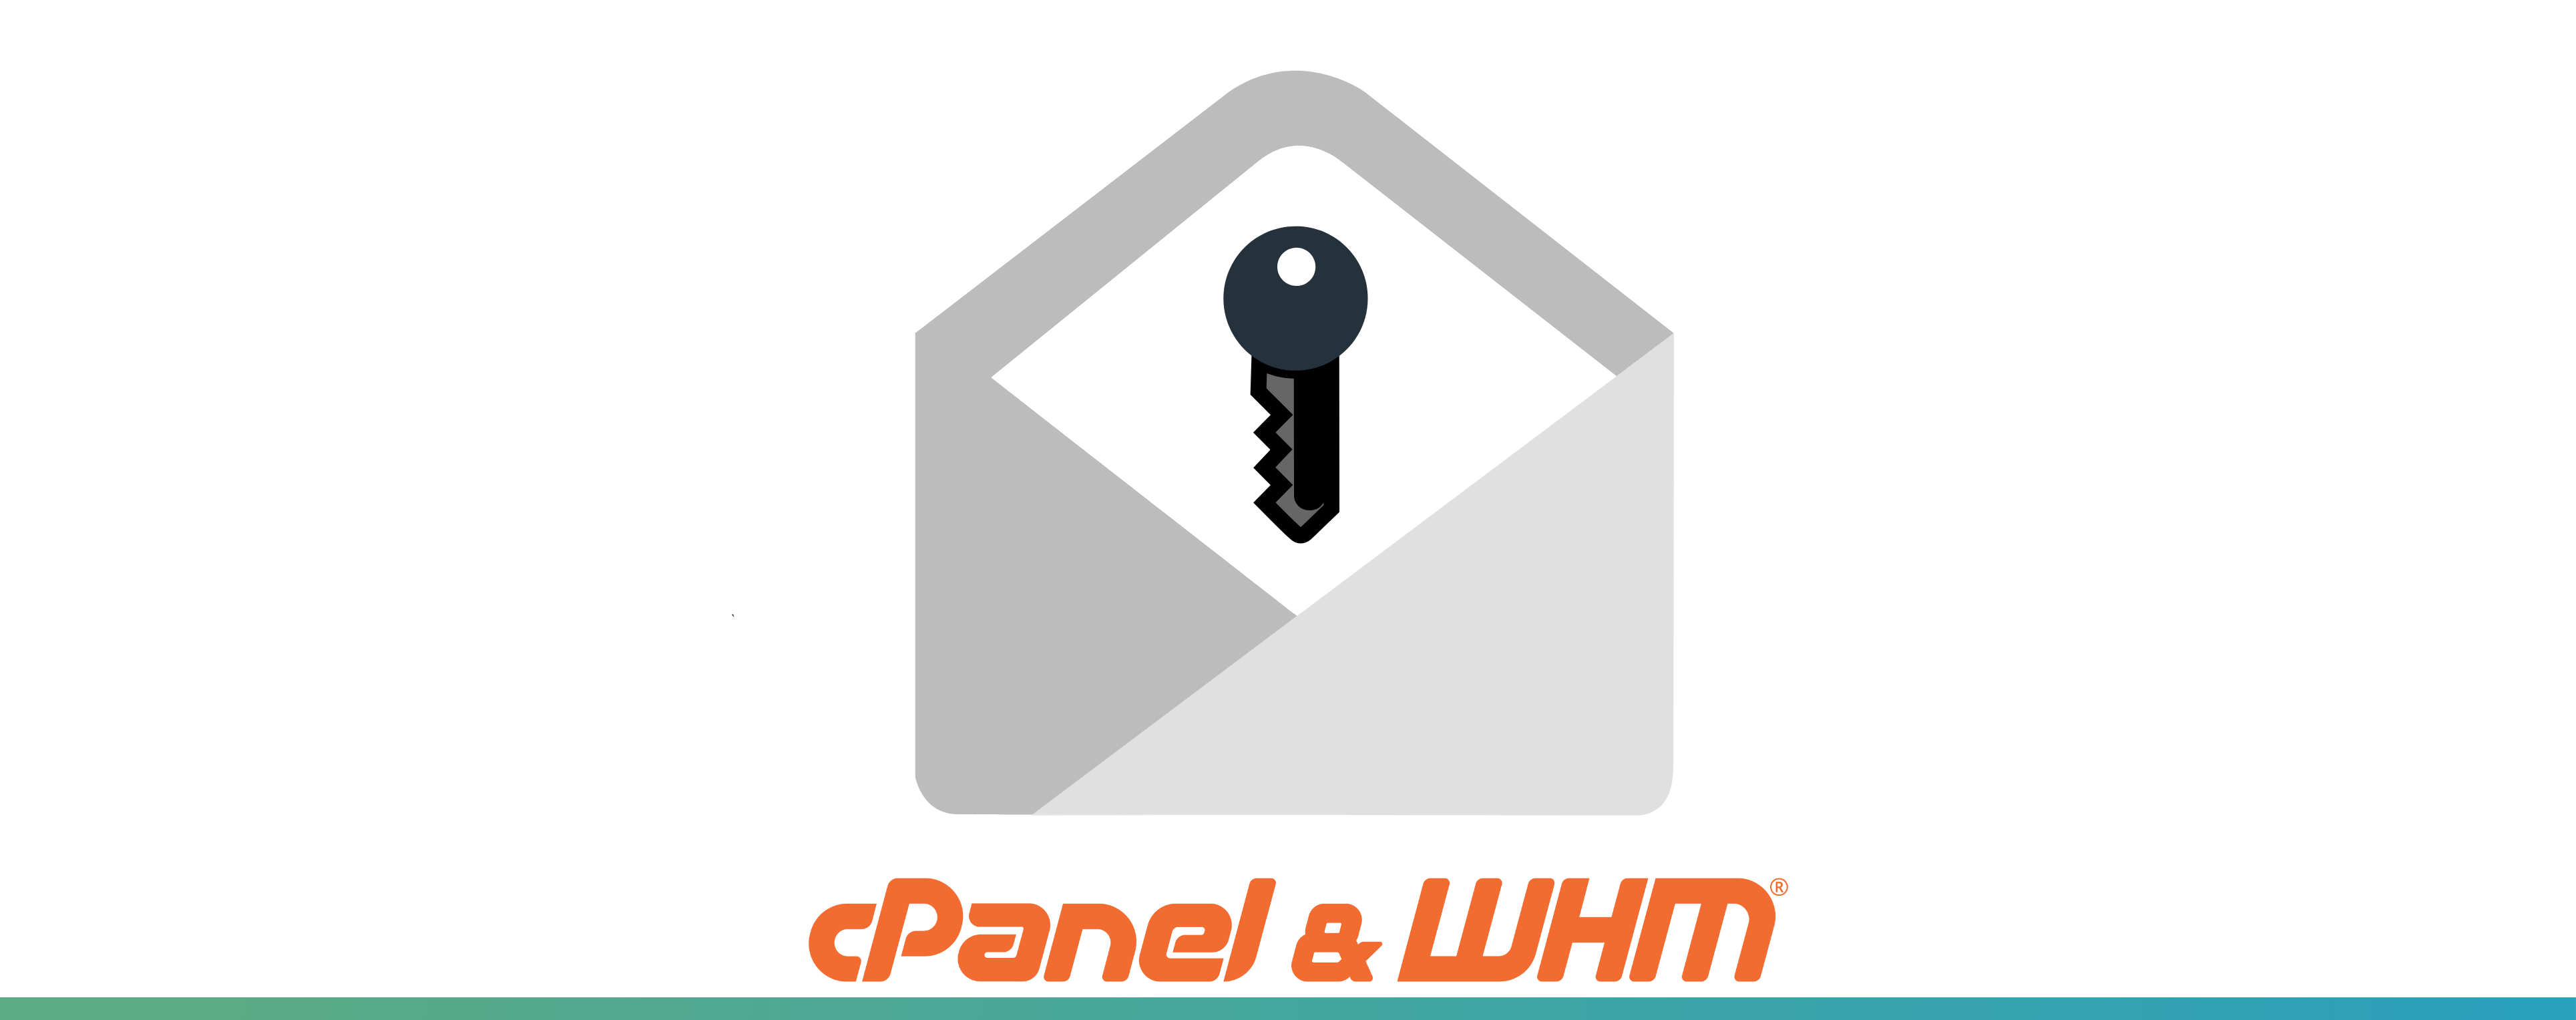 Introducing Email Deliverability Interface for WHM